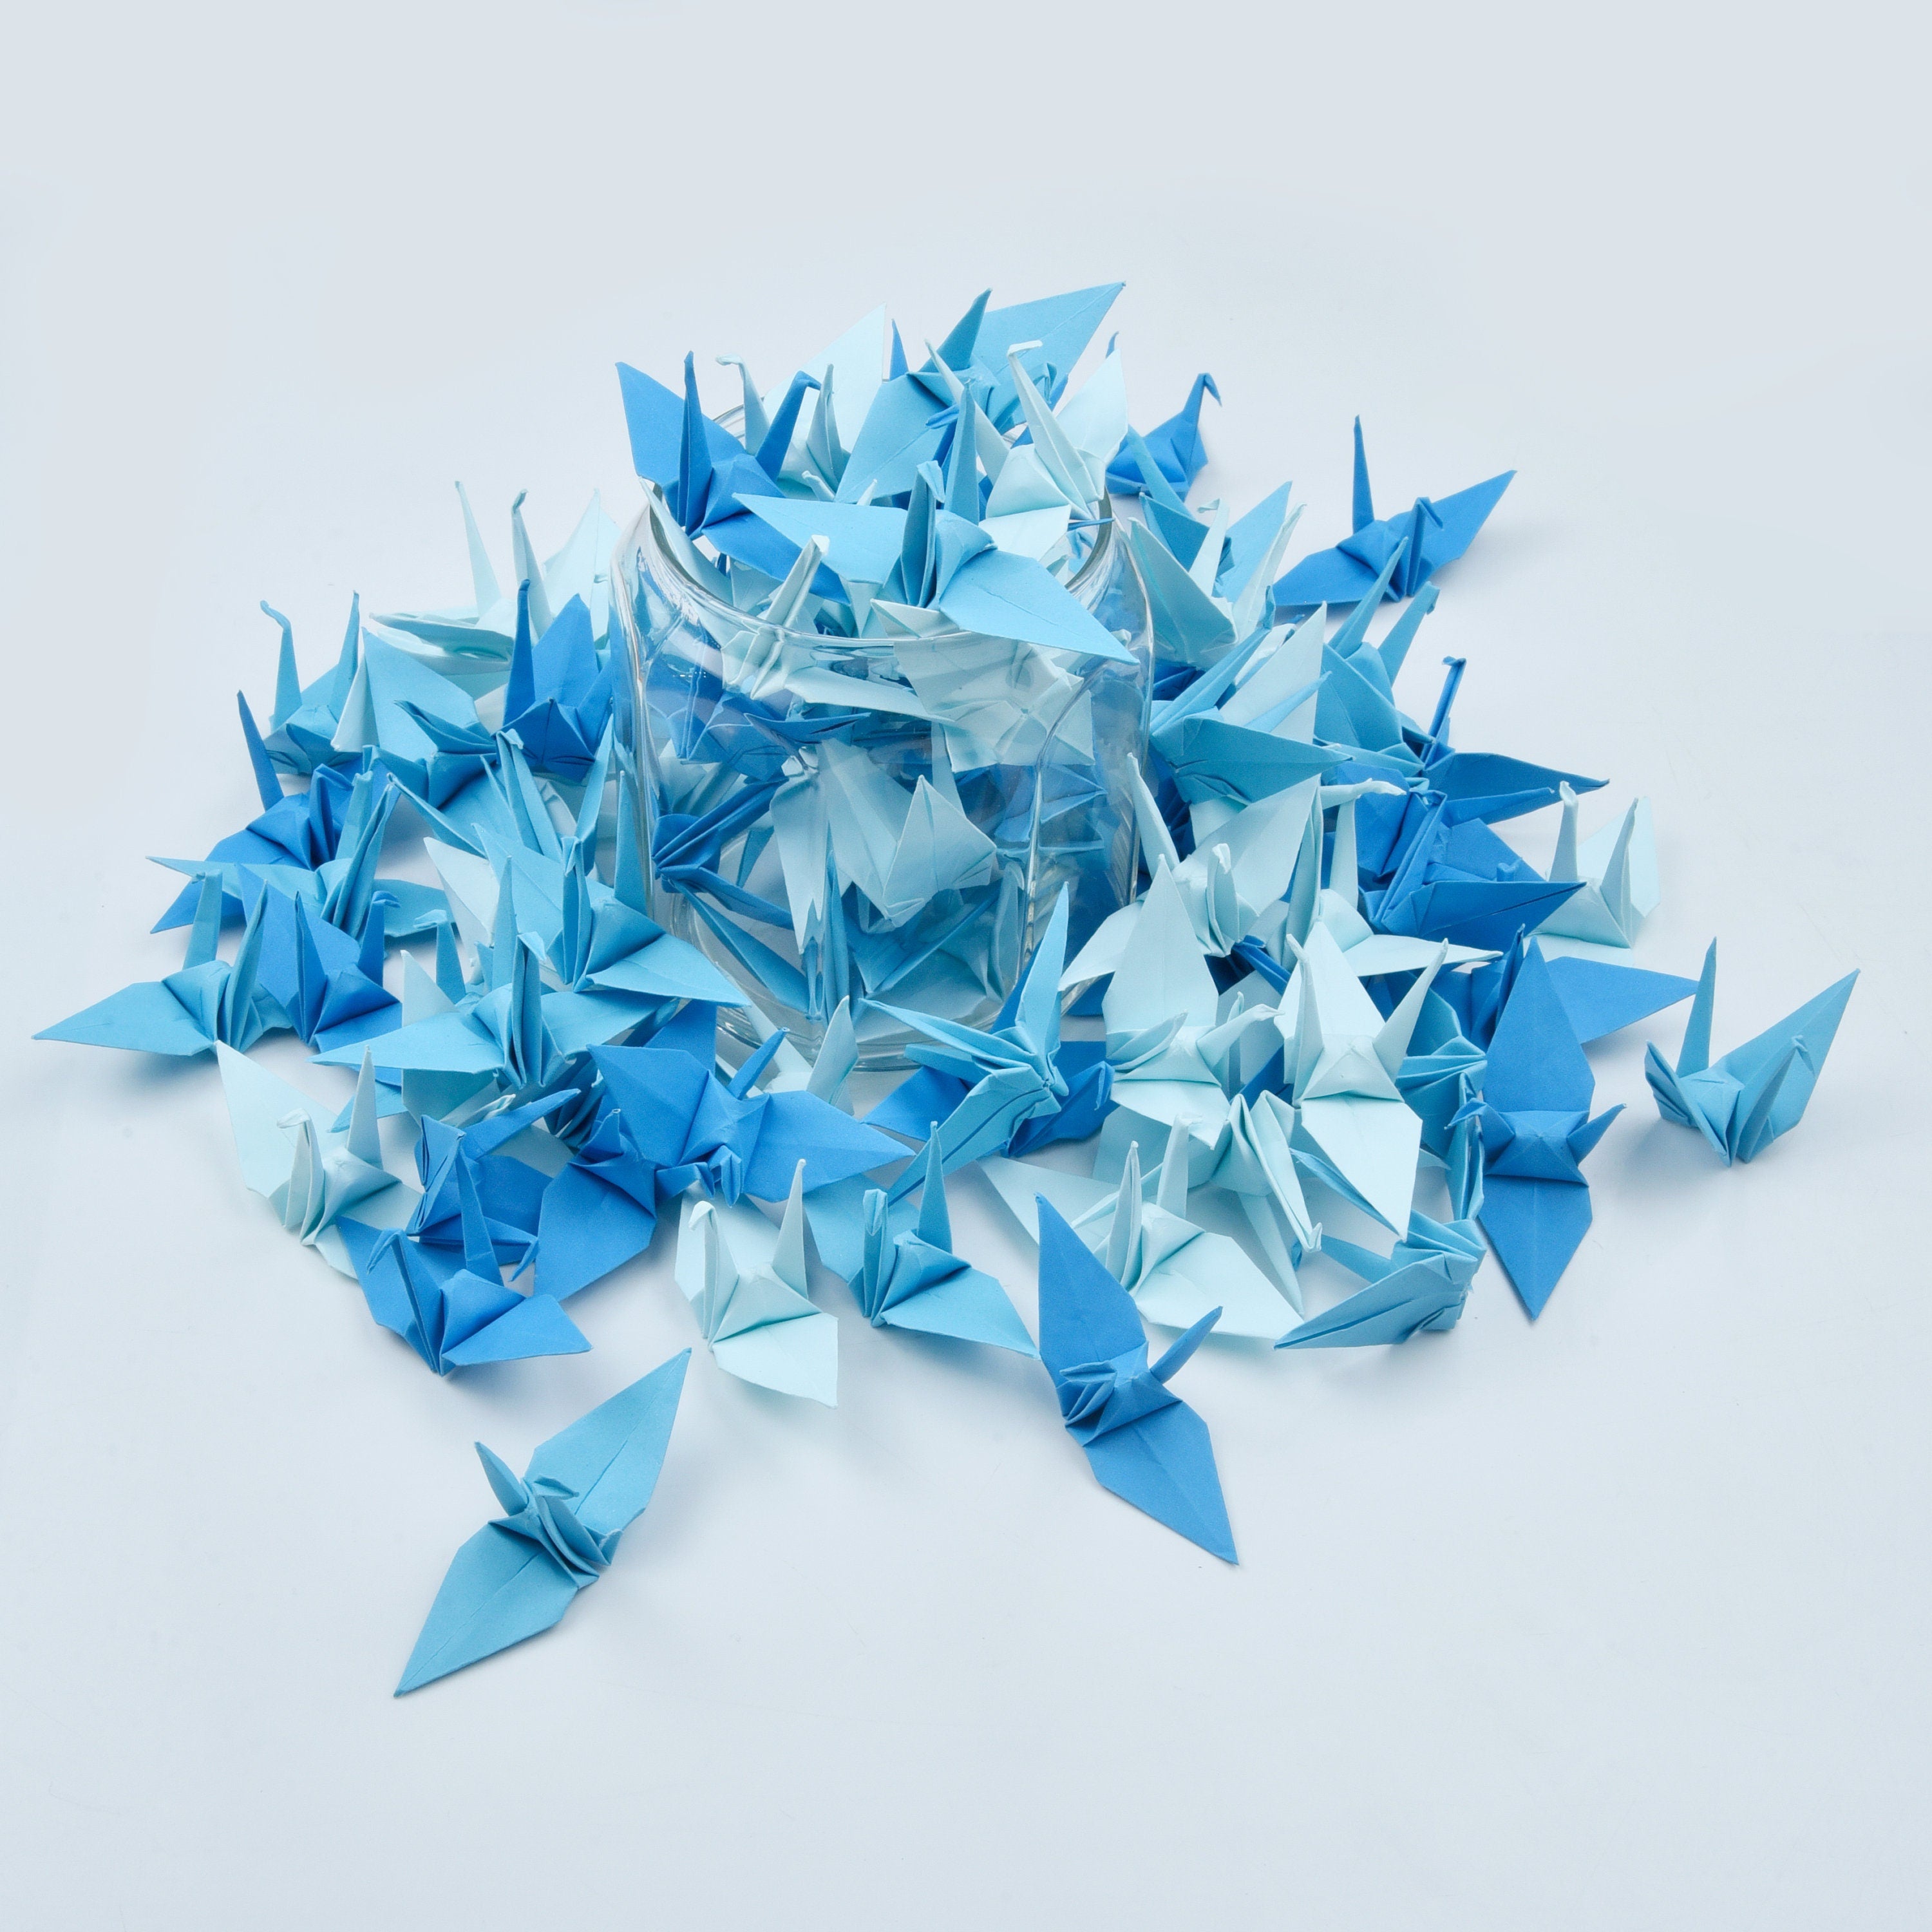 1000 Blue Shade Origami Paper Cranes 3x3 inches 7.5 cm